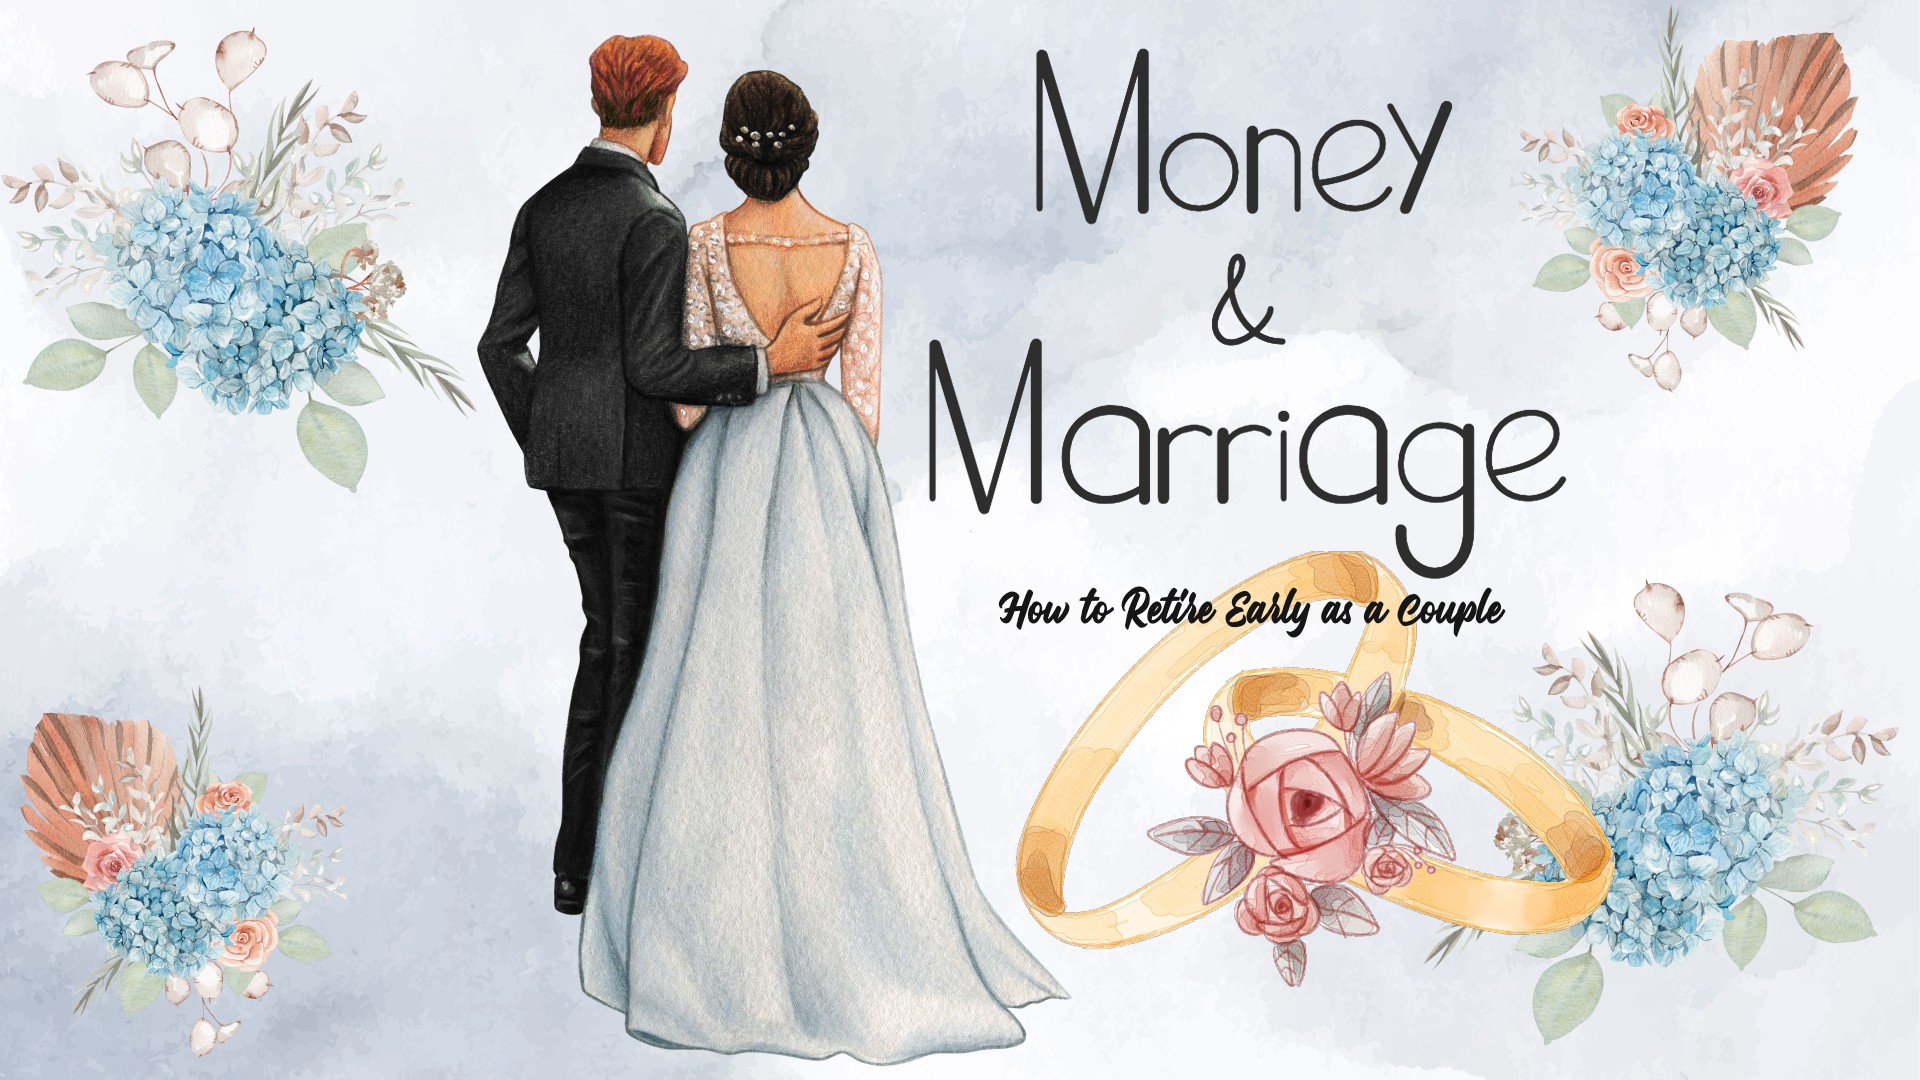 Money & Marriage: How to Retire Early as a Couple